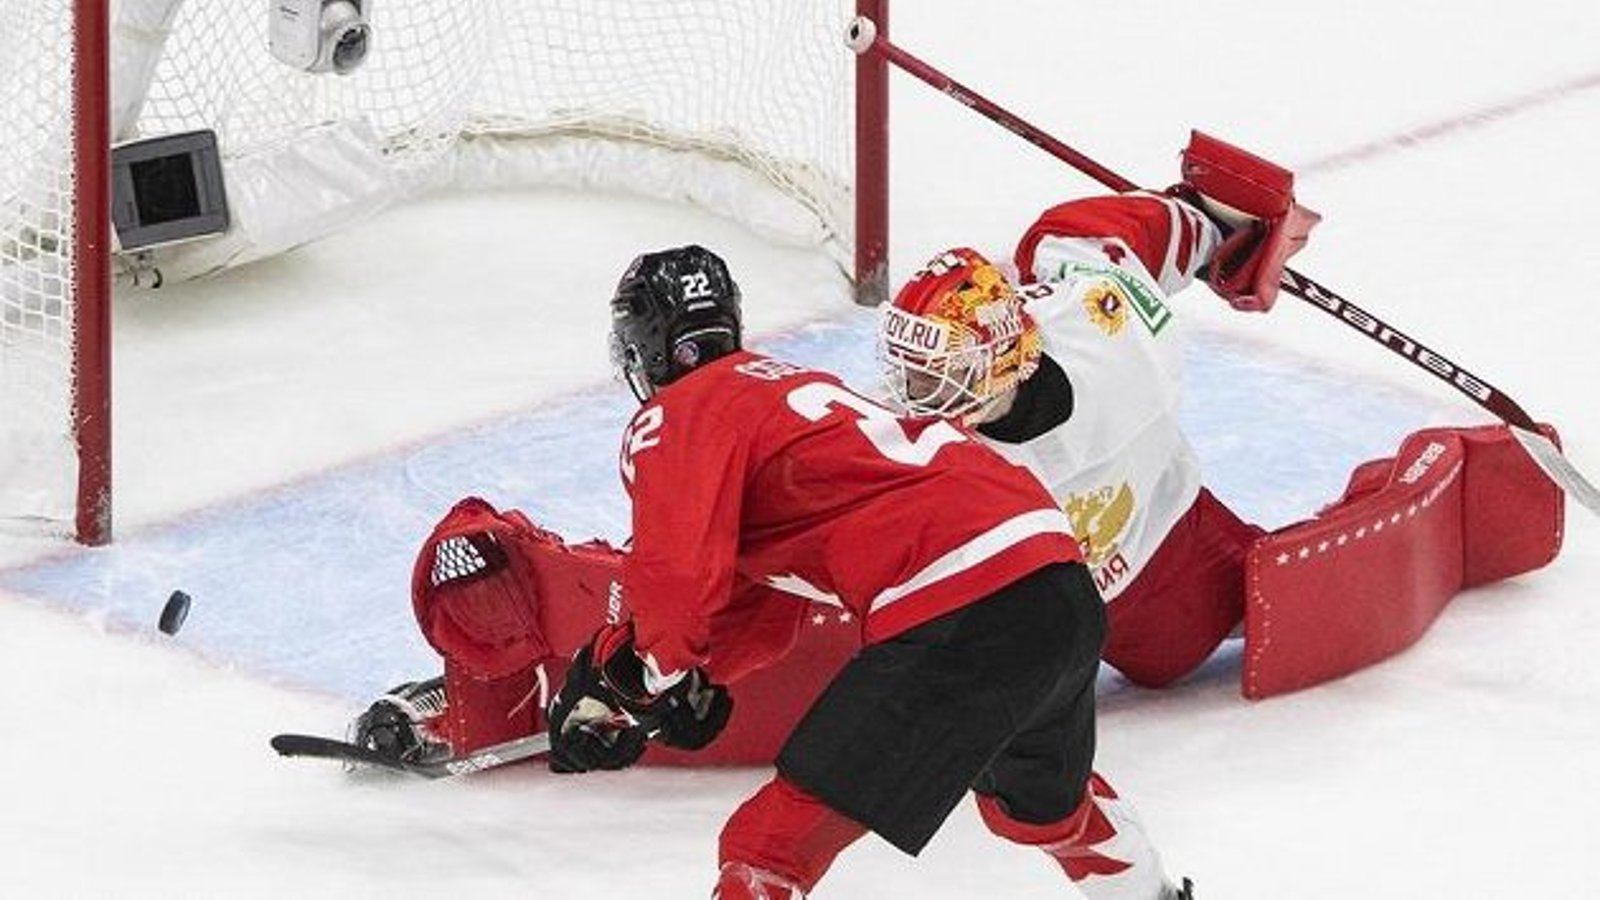 Team Russia goalie Askarov buys superglue for his stick after getting roasted at WJC